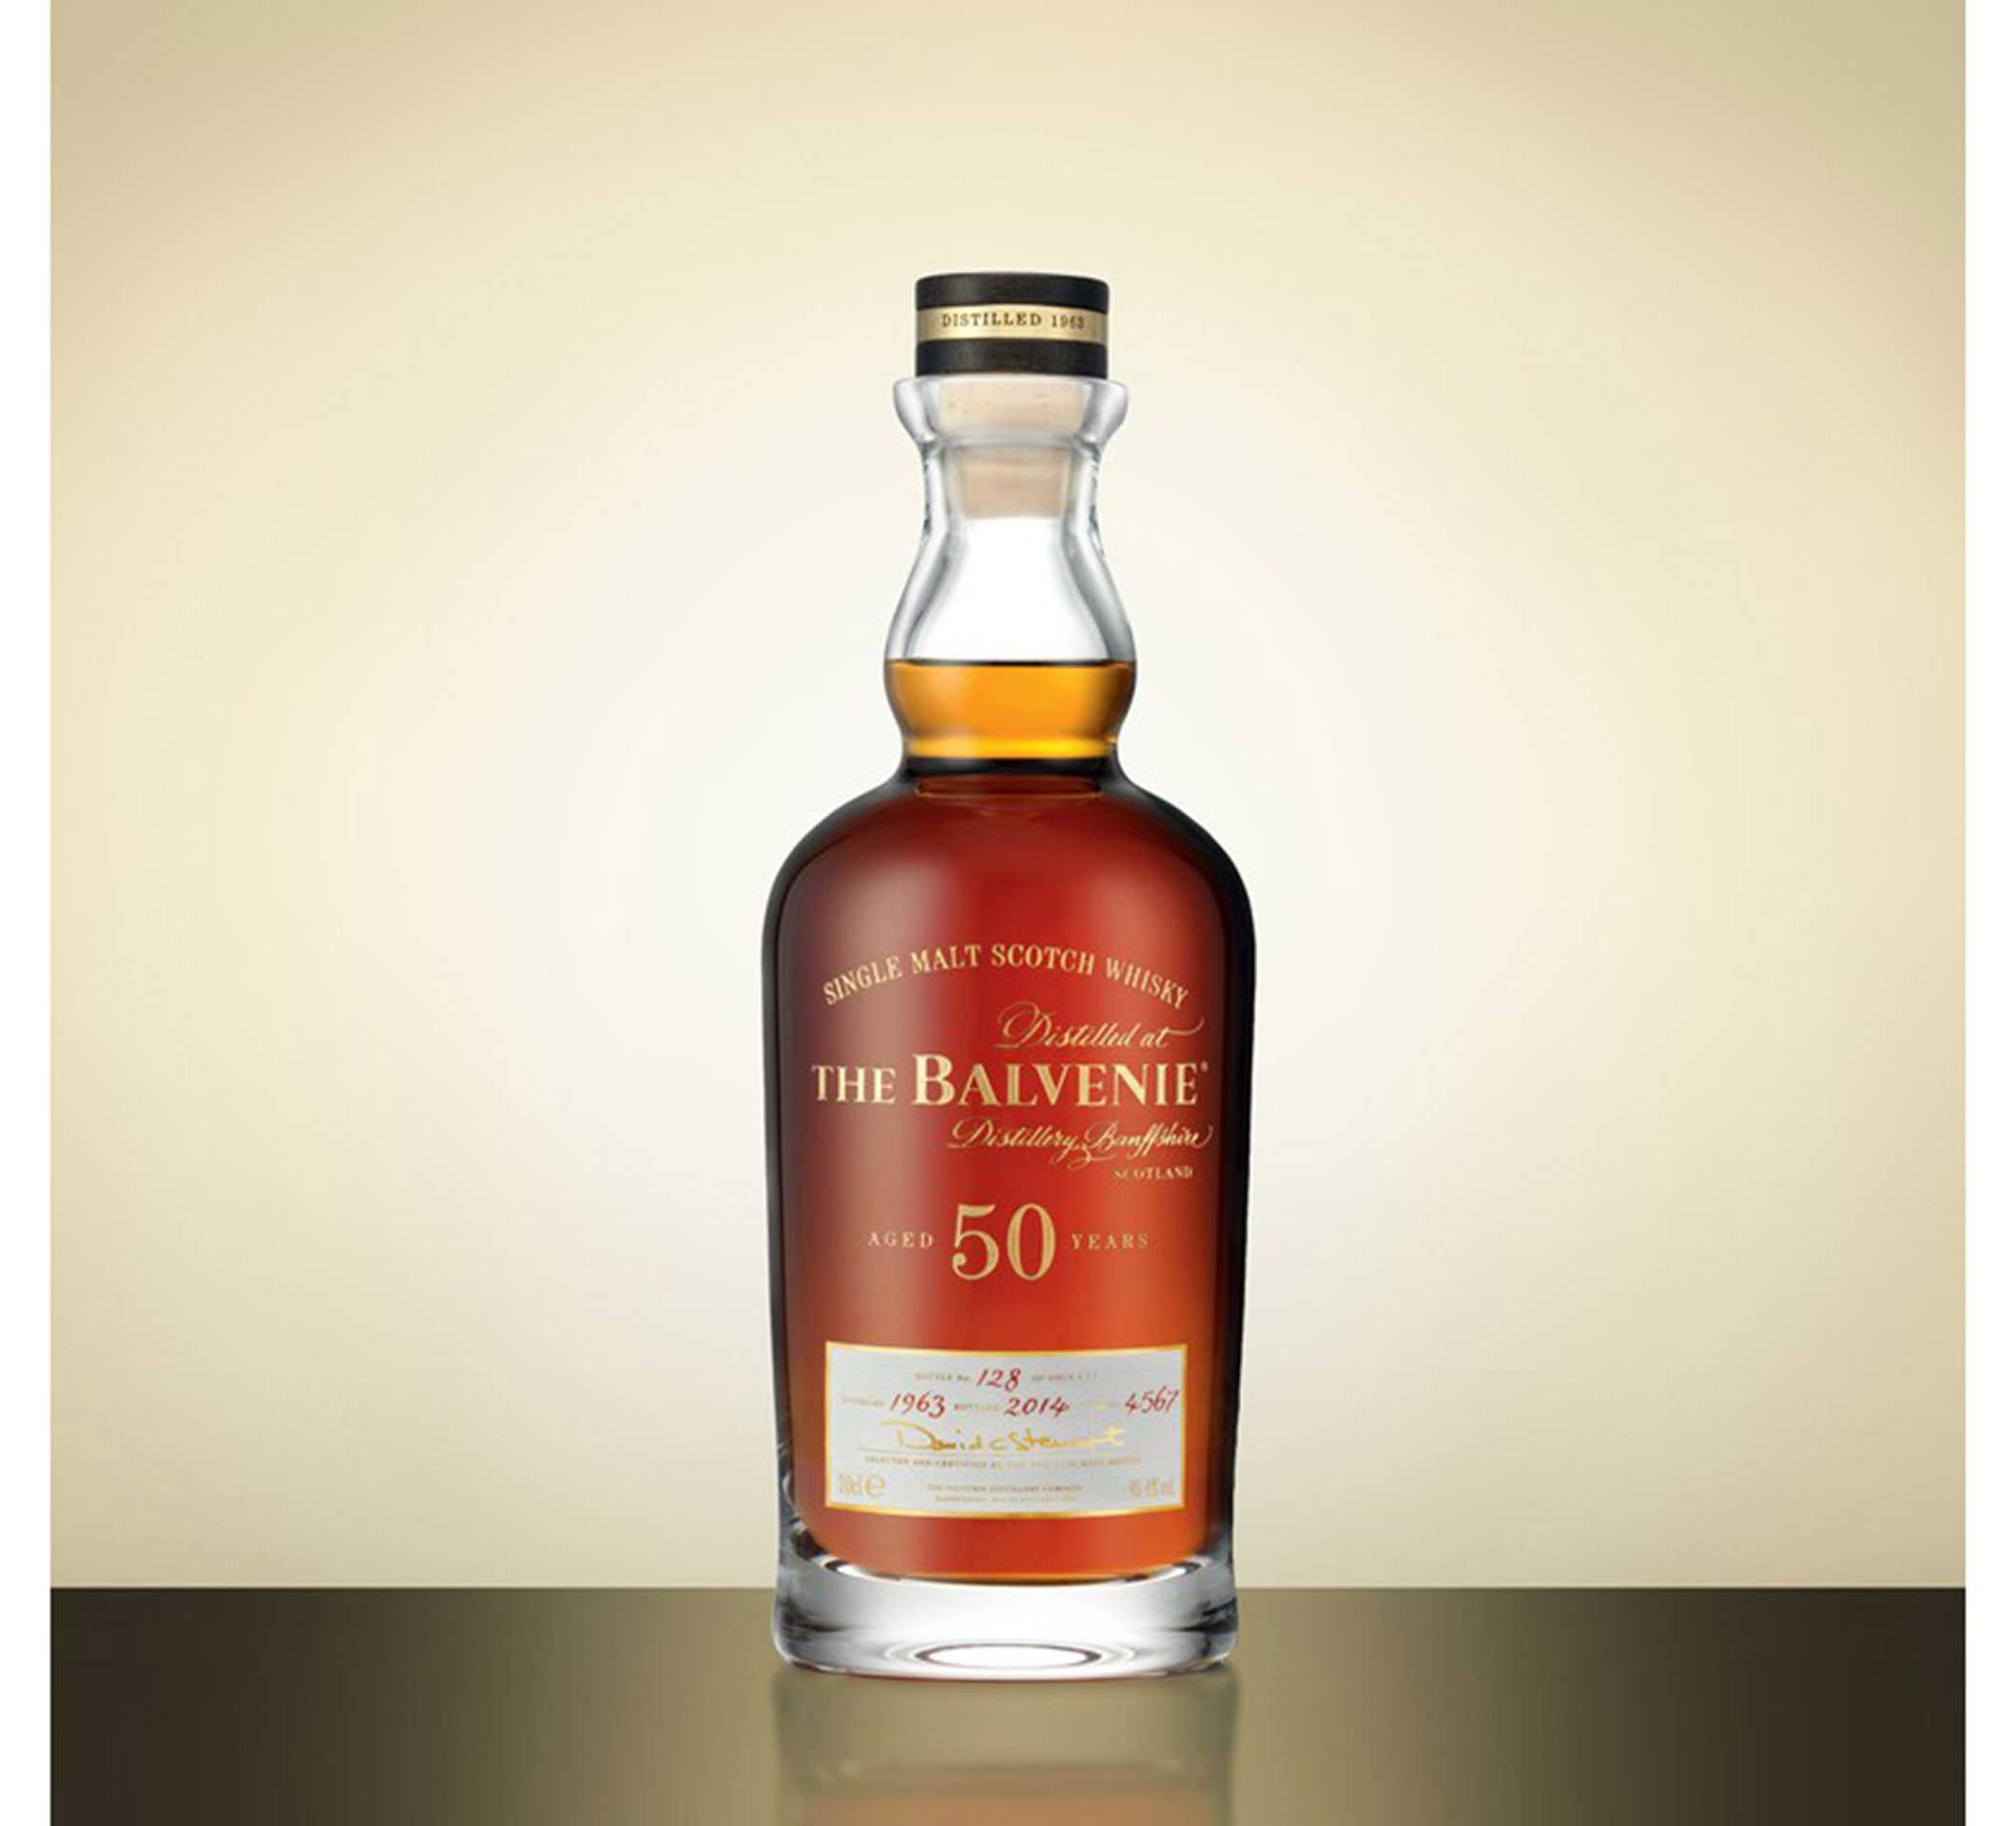 5 of the most expensive whiskies in the world